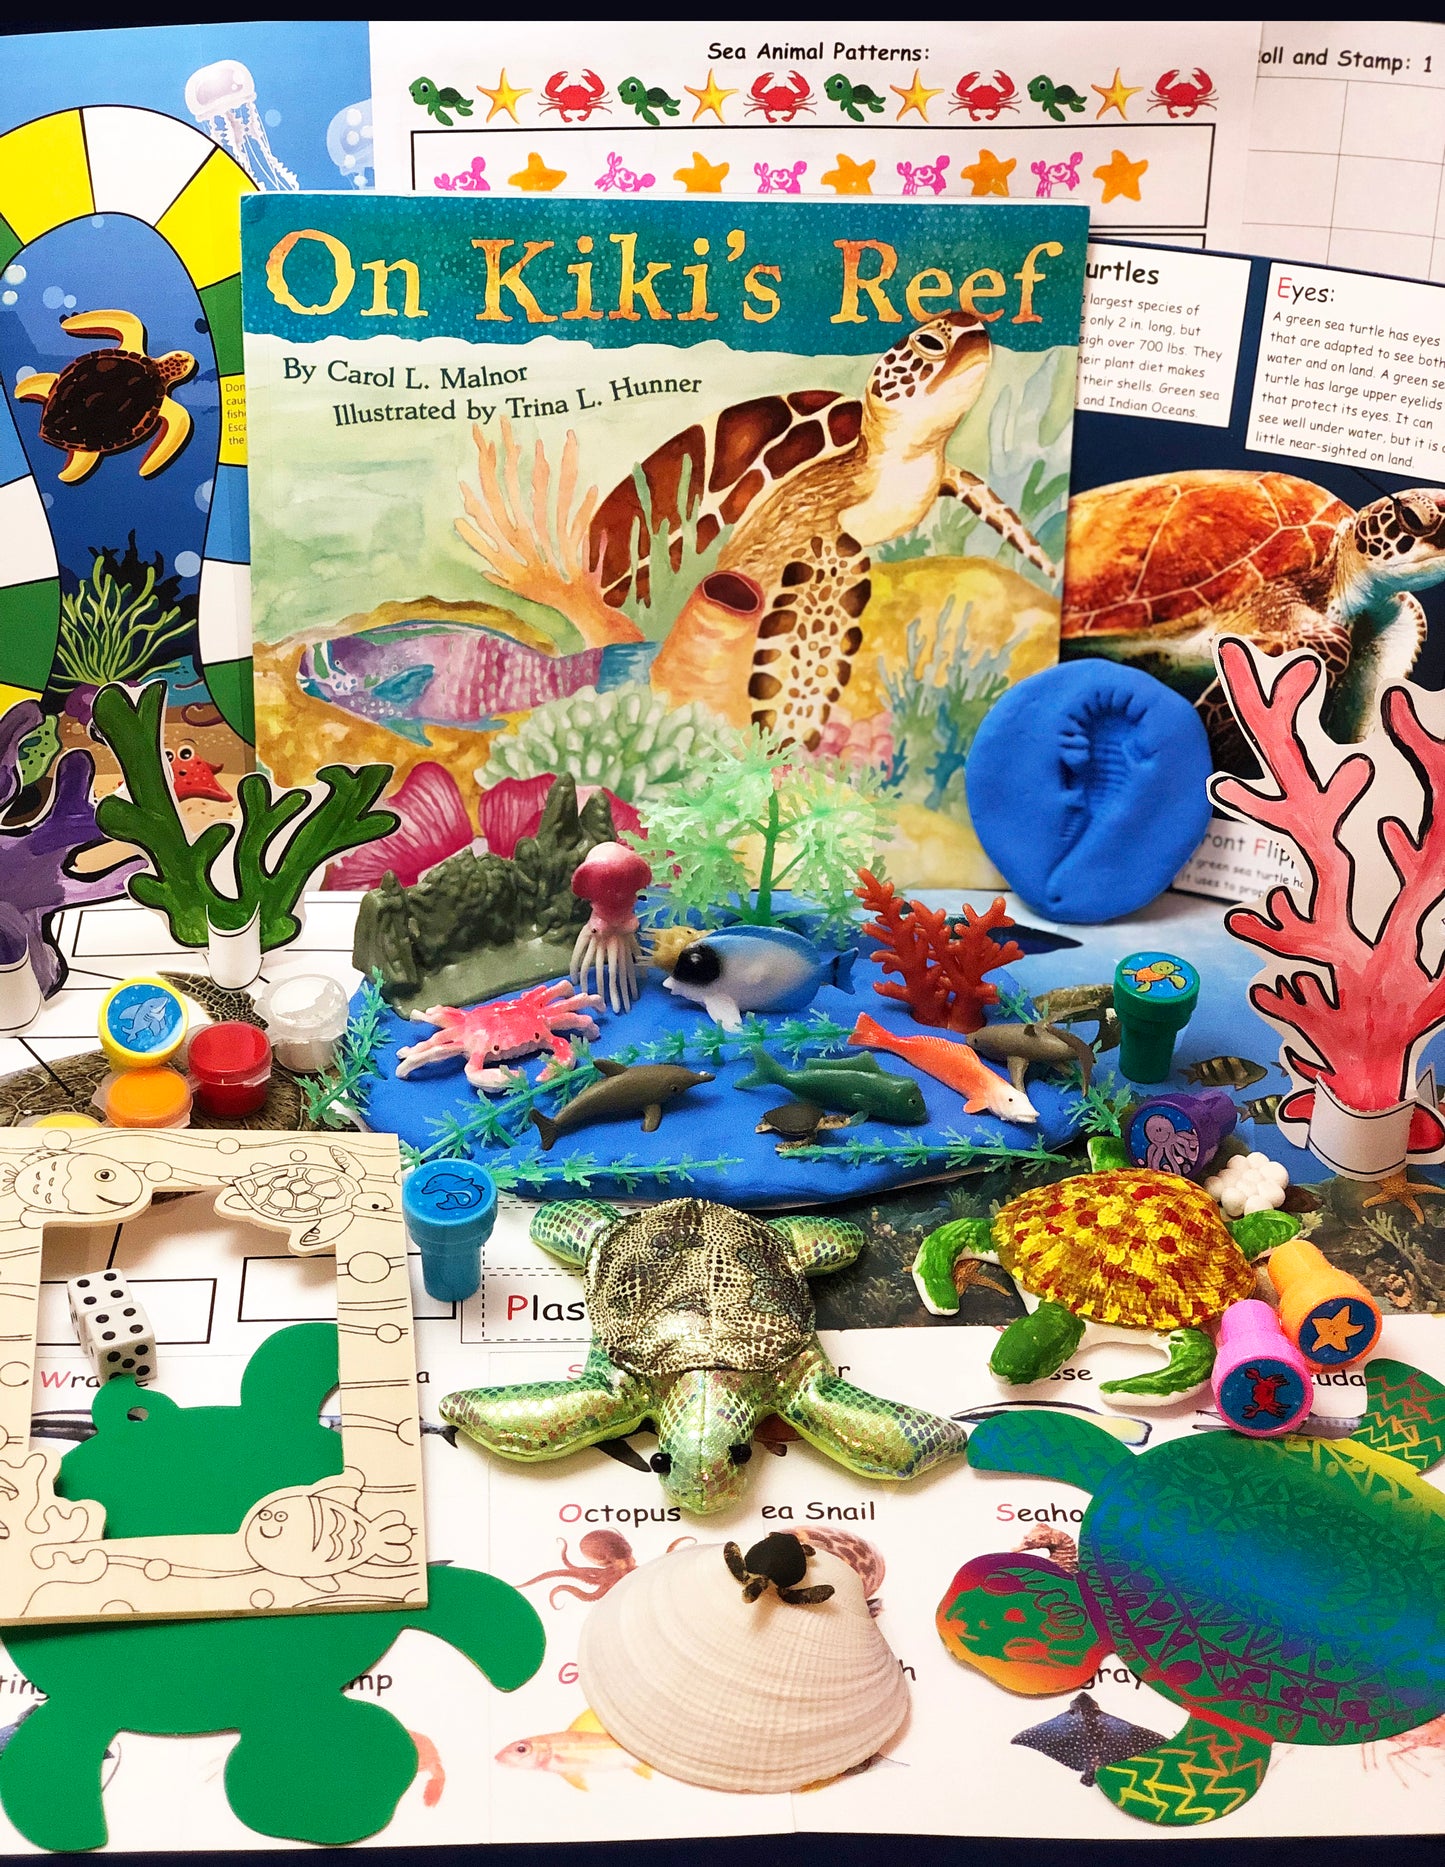 Green Sea Turtle and coral reef themed activities for kids